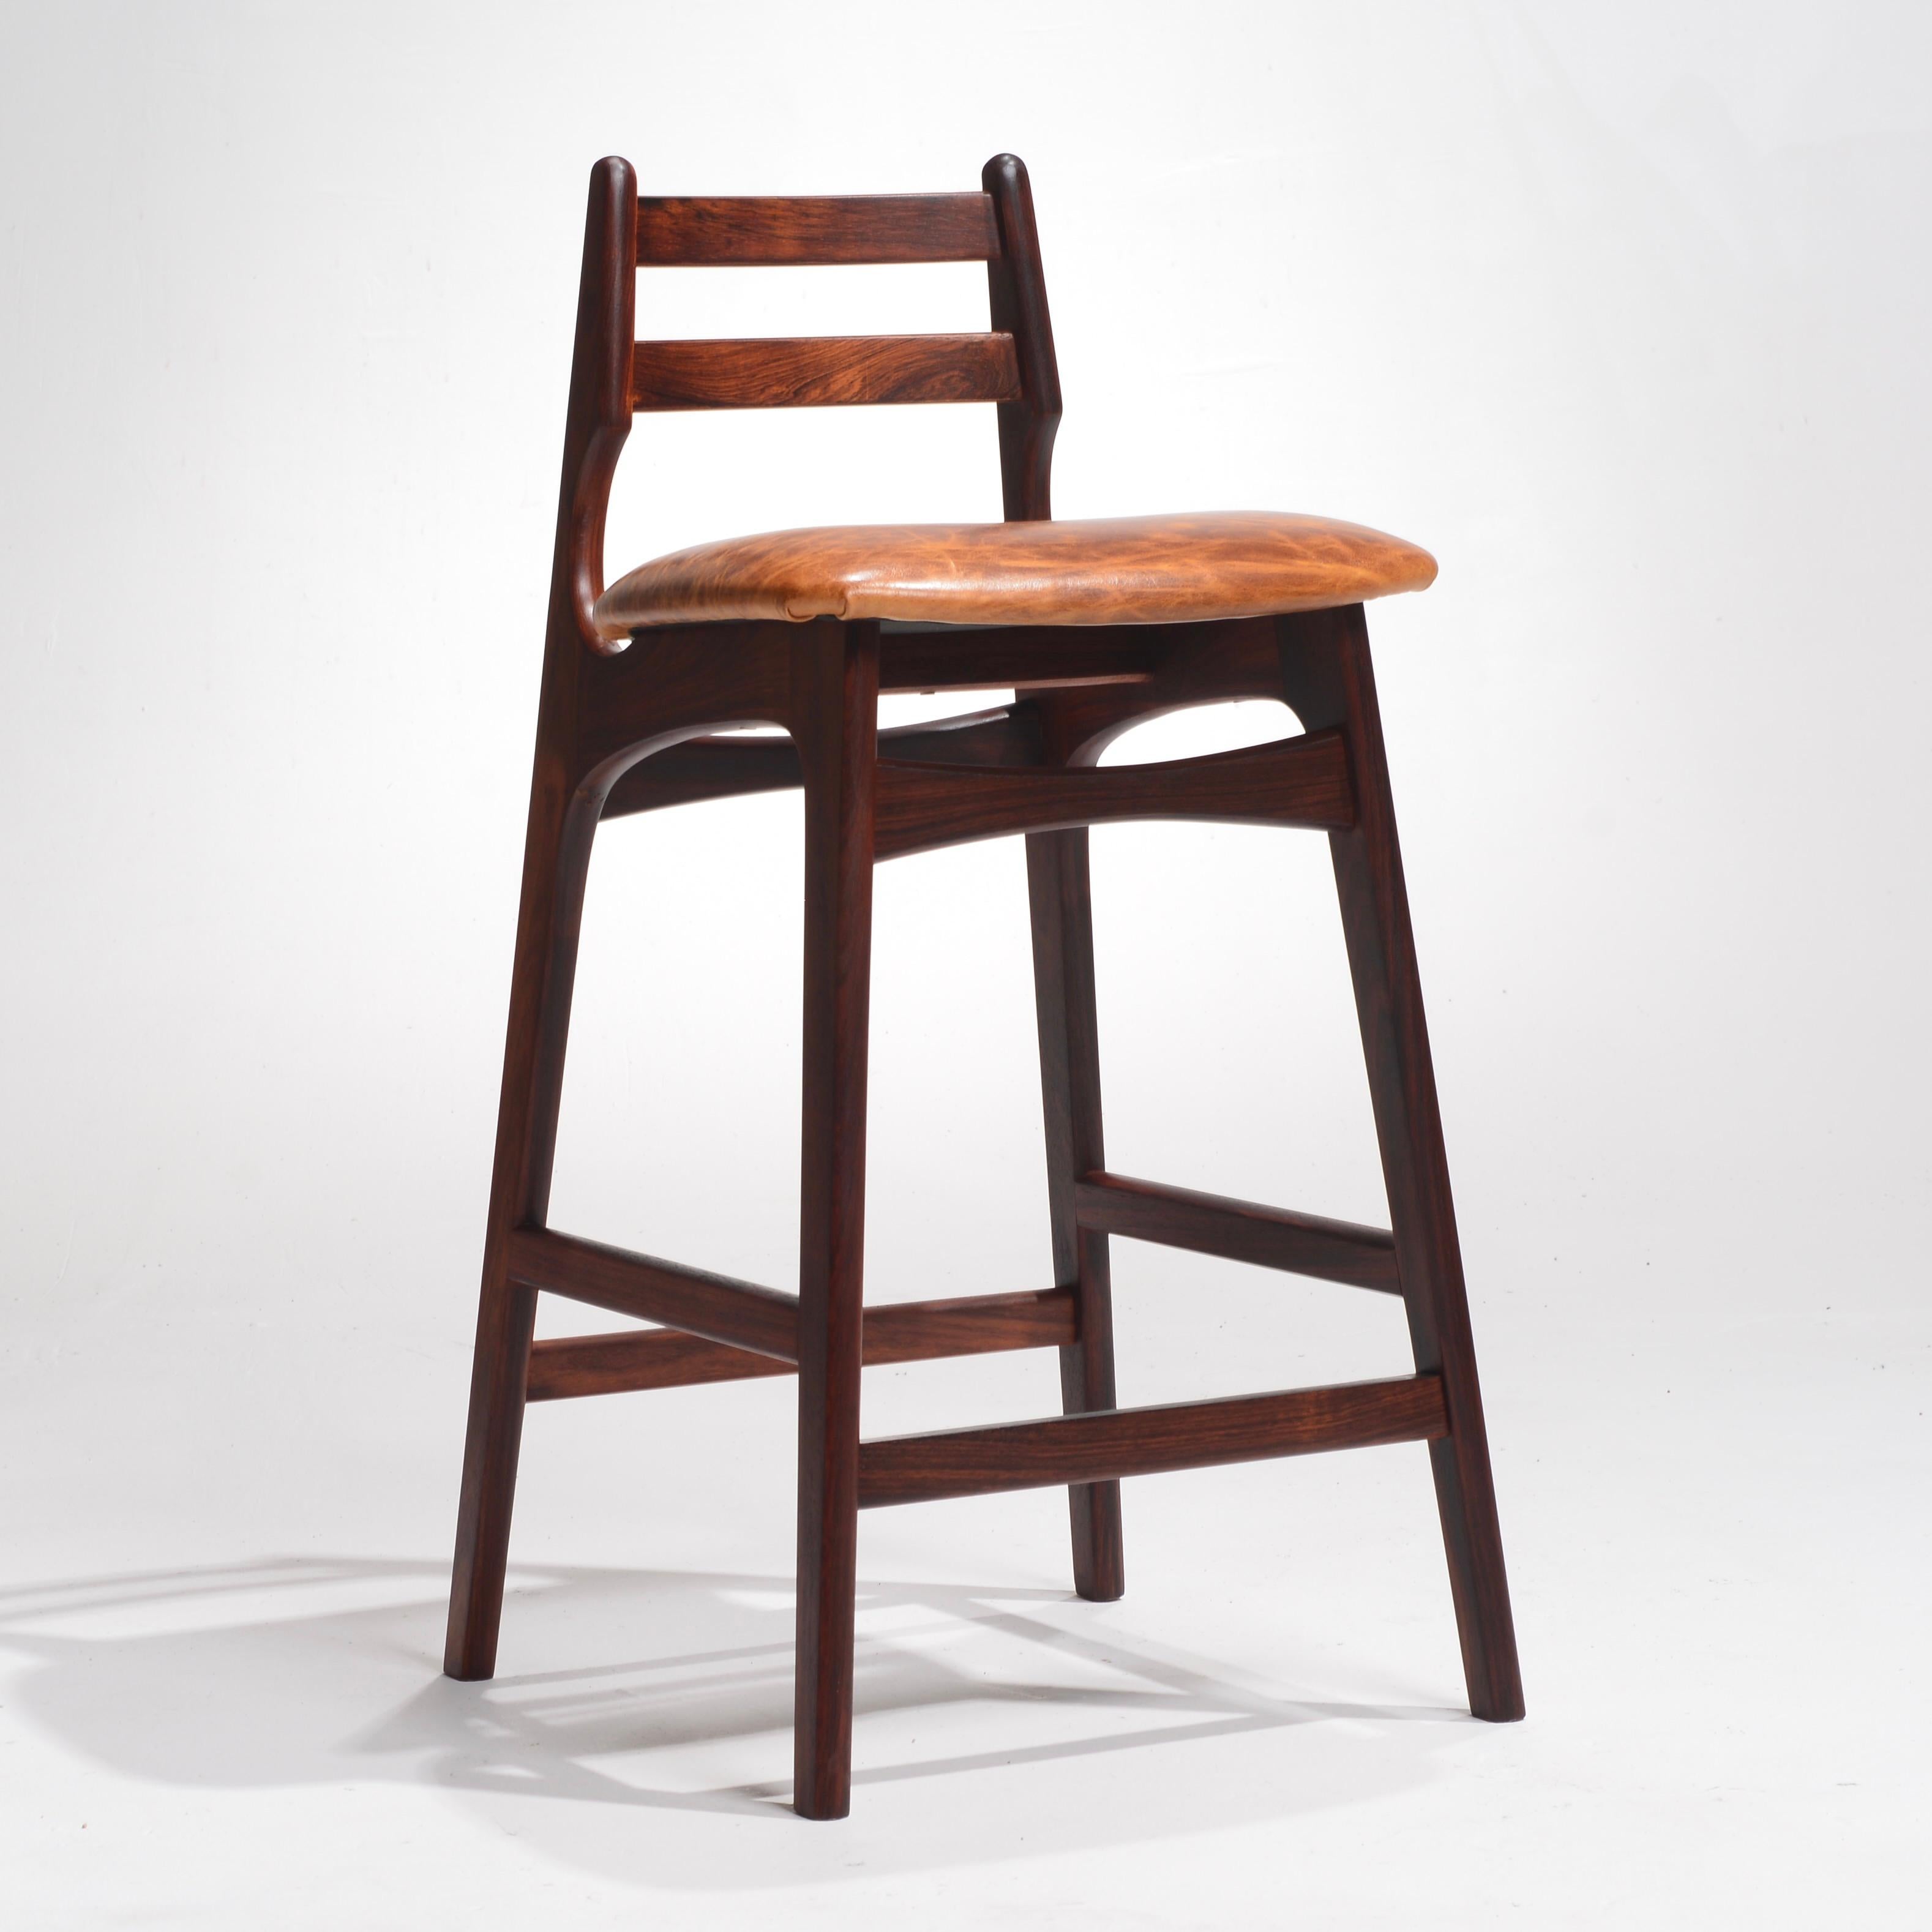 Set of 2 Erik Buck Mid Century Danish Modern Rosewood Counter Stools In Excellent Condition For Sale In Los Angeles, CA